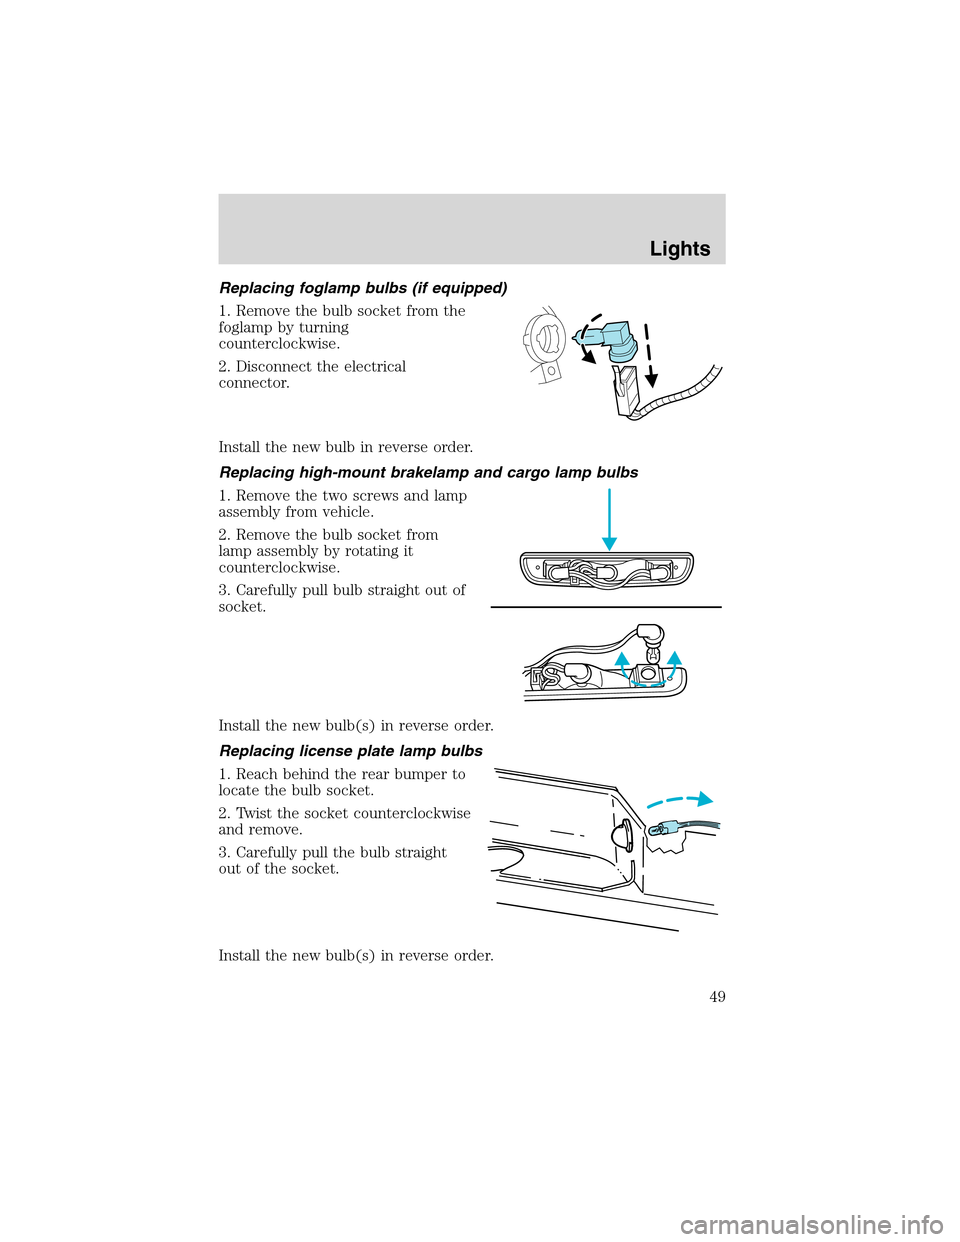 FORD RANGER 2003 2.G Owners Manual Replacing foglamp bulbs (if equipped)
1. Remove the bulb socket from the
foglamp by turning
counterclockwise.
2. Disconnect the electrical
connector.
Install the new bulb in reverse order.
Replacing h